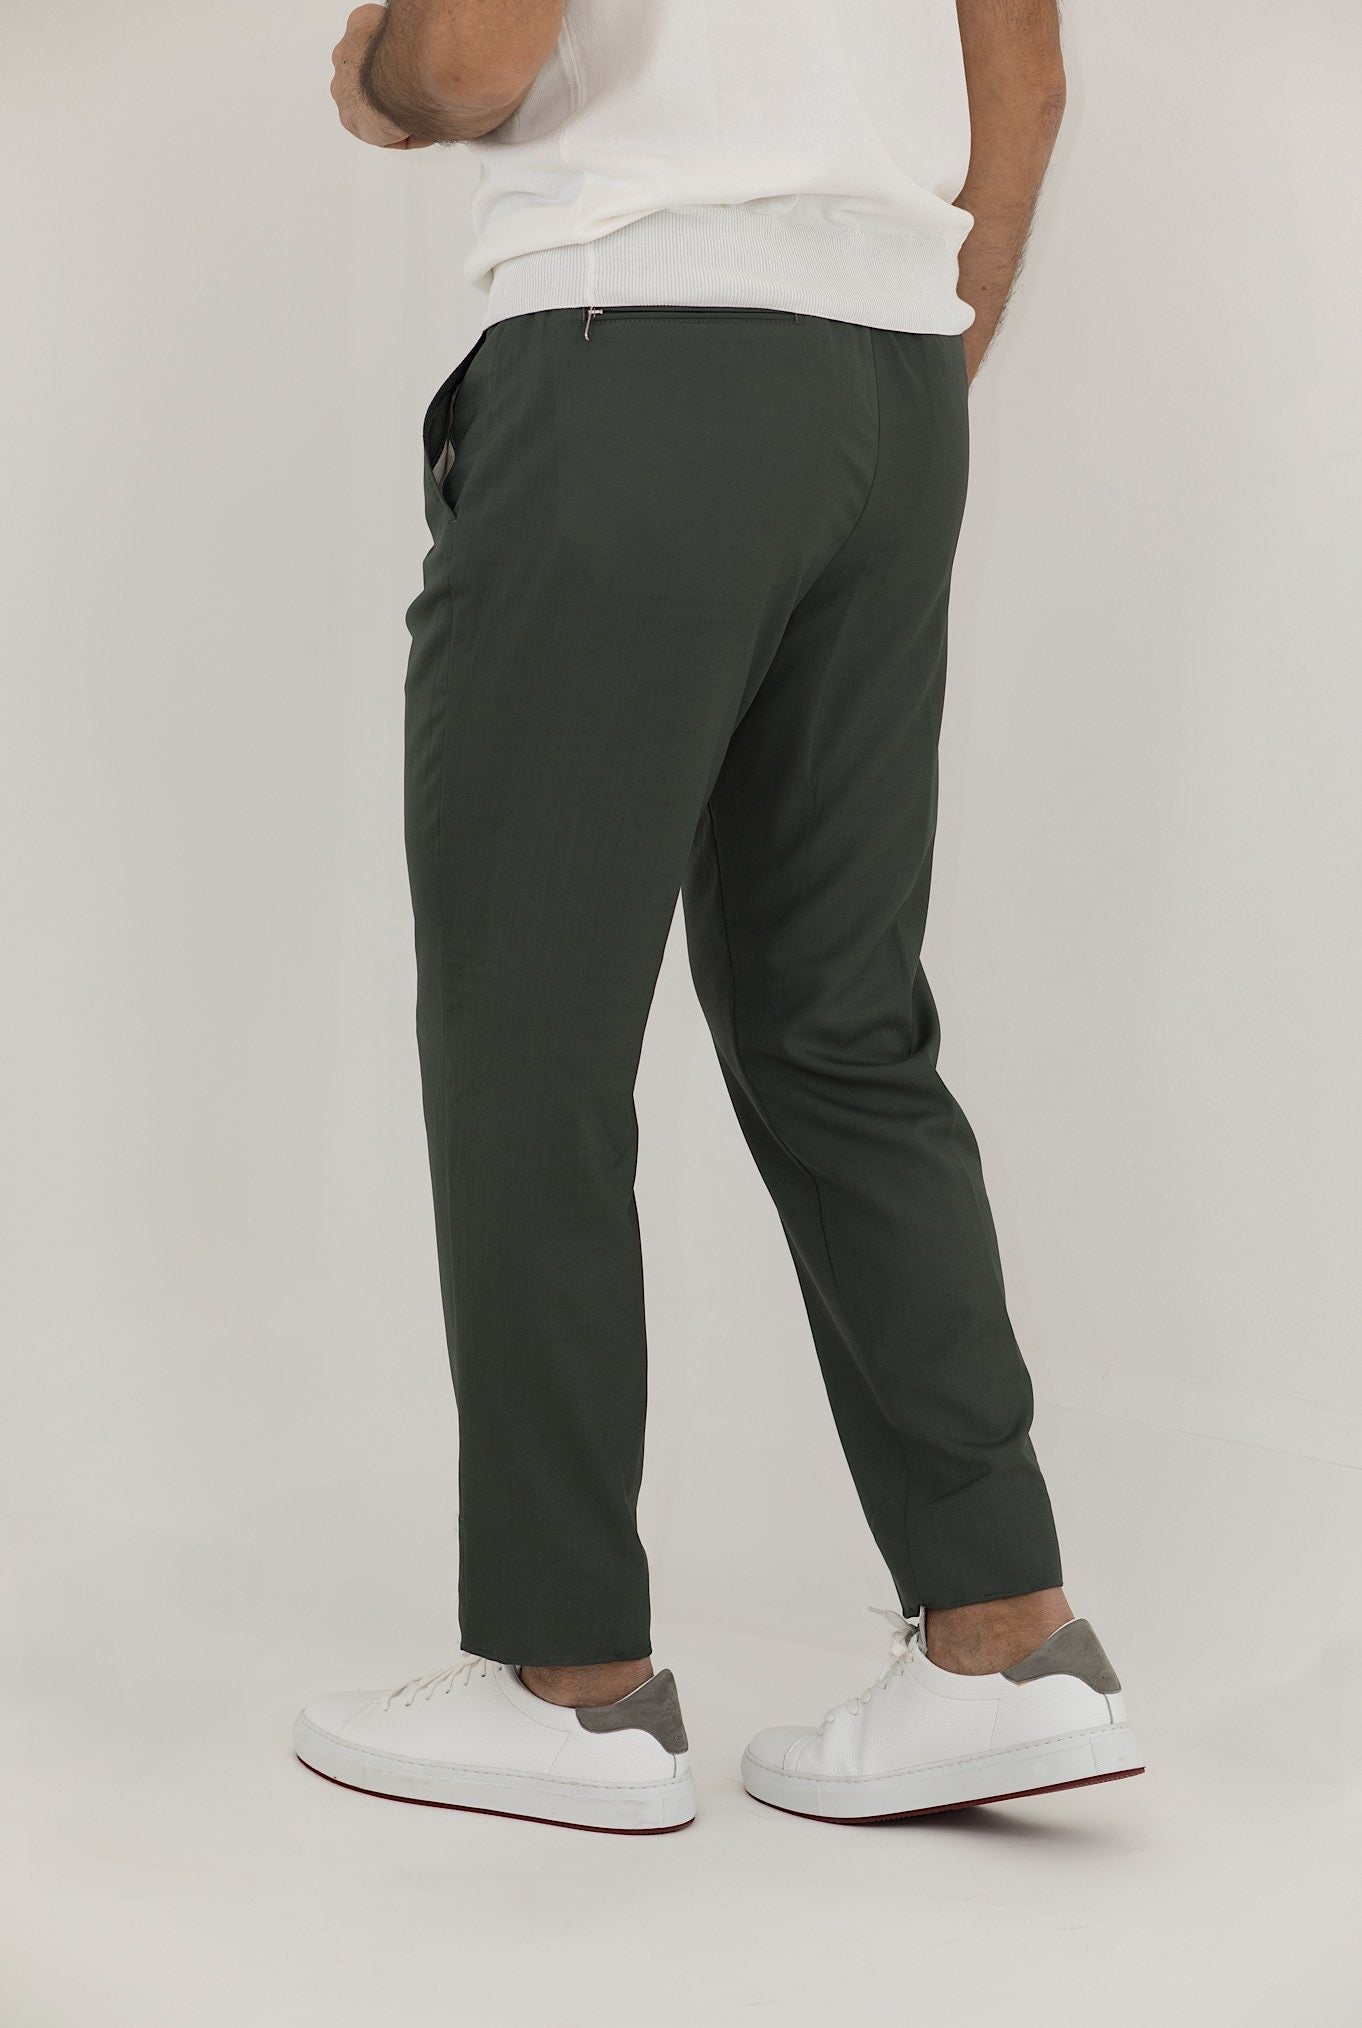 MARCO PESCAROLO Olive Green Wool and Silk Drawstring Trousers